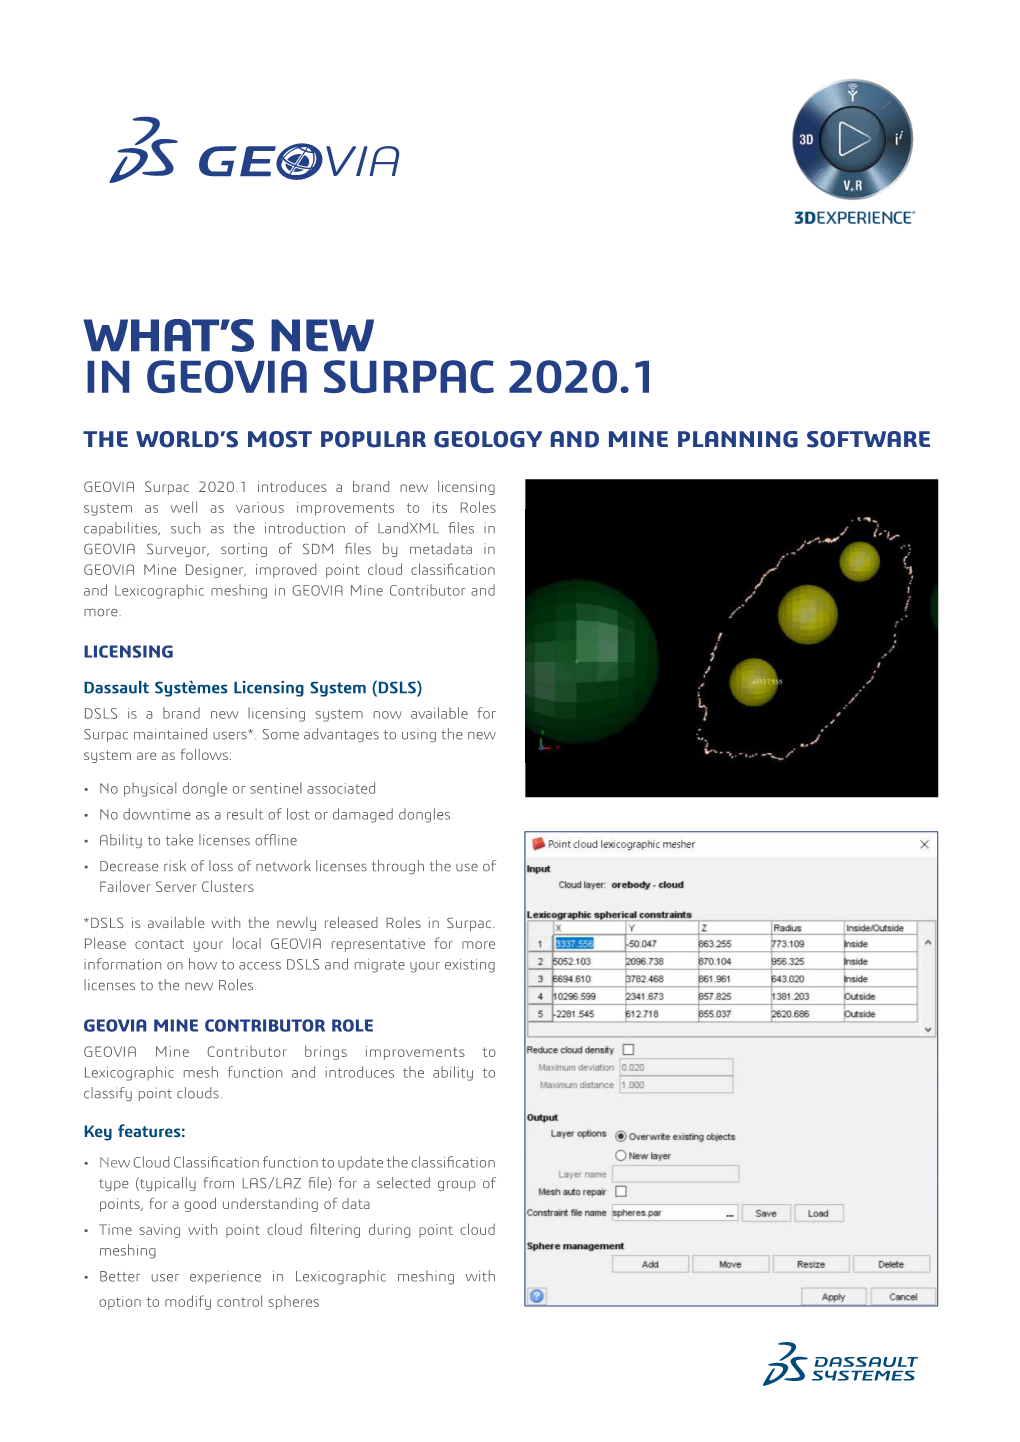 In Geovia Surpac 2020.1 What's